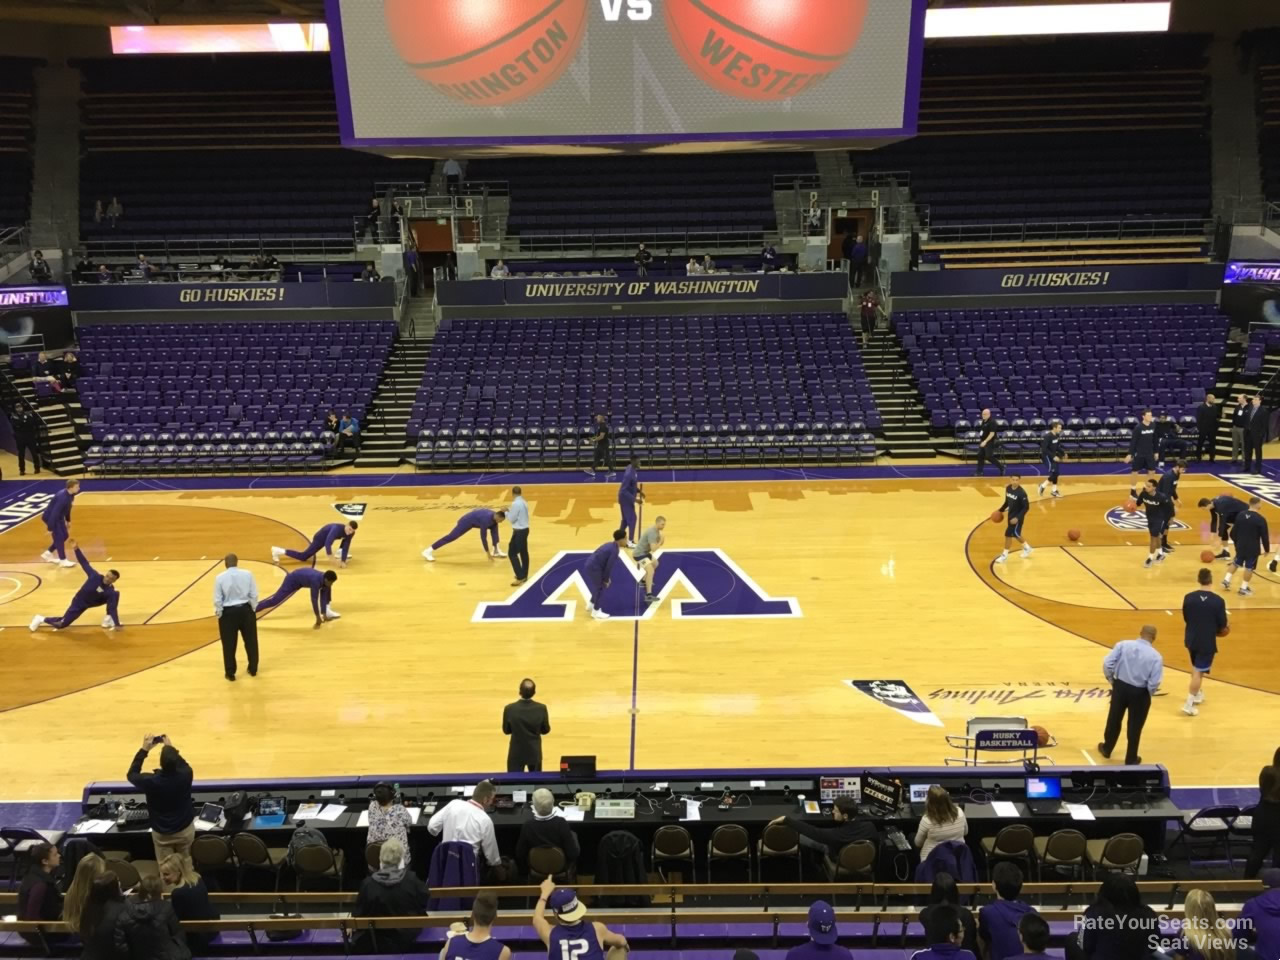 section 1, row 10 seat view  - alaska airlines arena